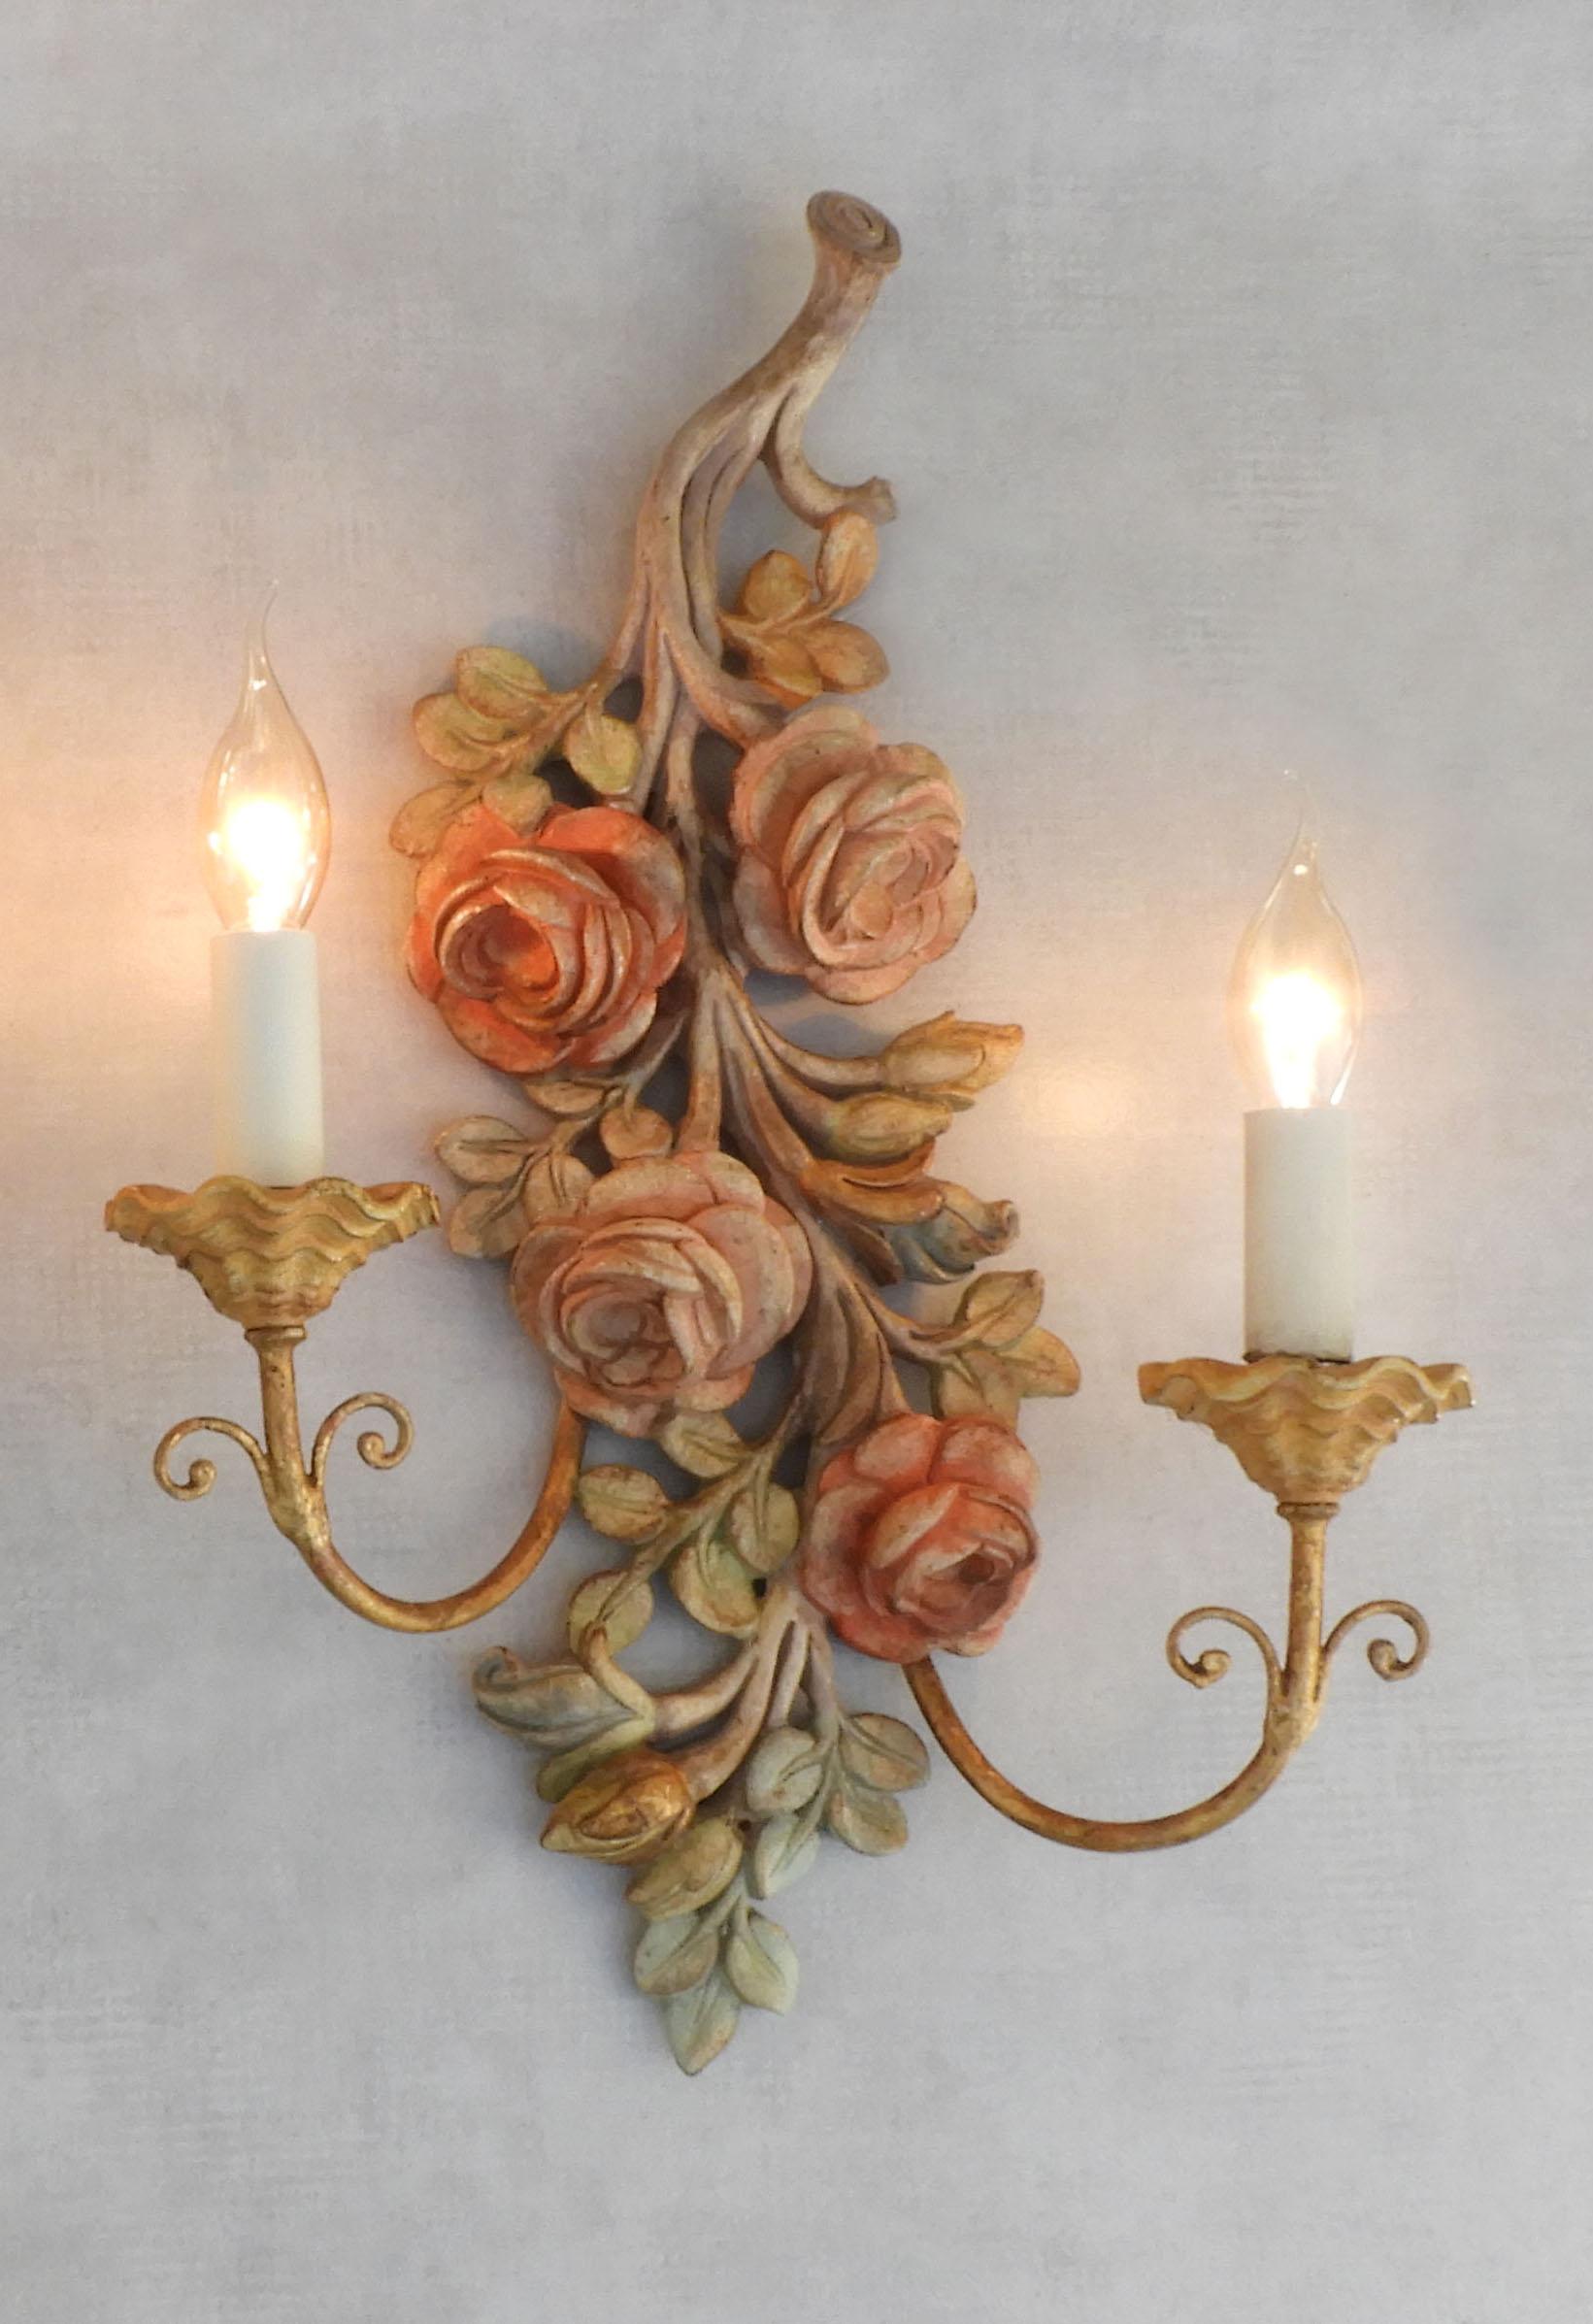 Pair of Vintage Italian Carved Wood Rose Flower Wall light Sconces In Good Condition For Sale In Trensacq, FR